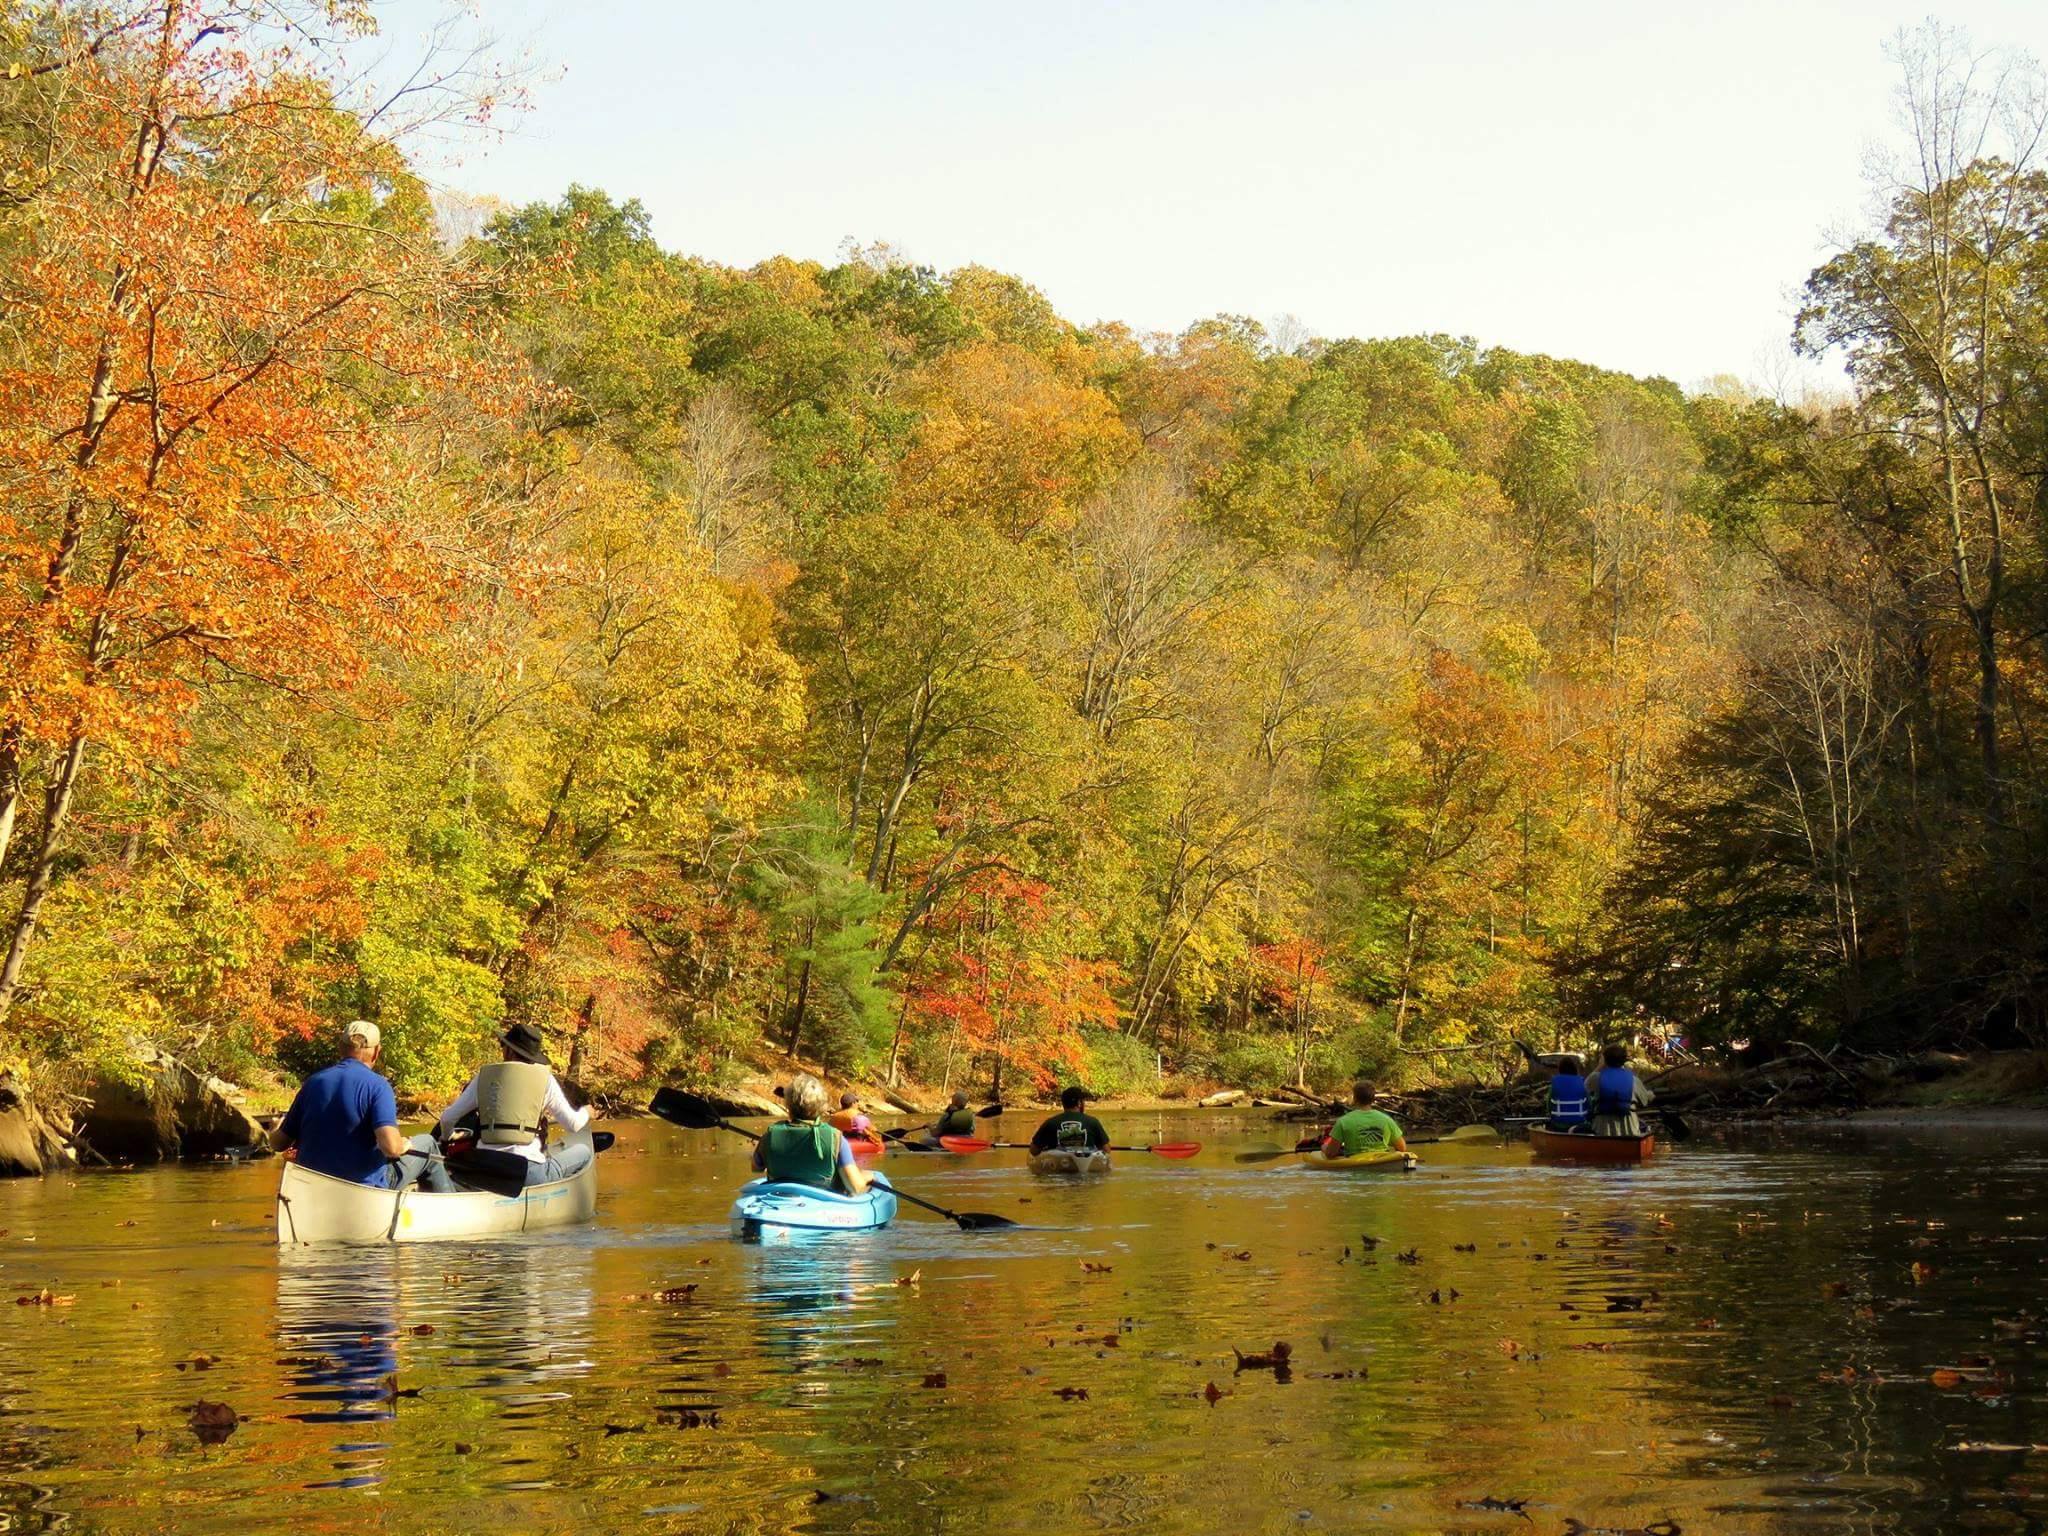 Two Exciting Seasonal Paddling Events Coming Up!